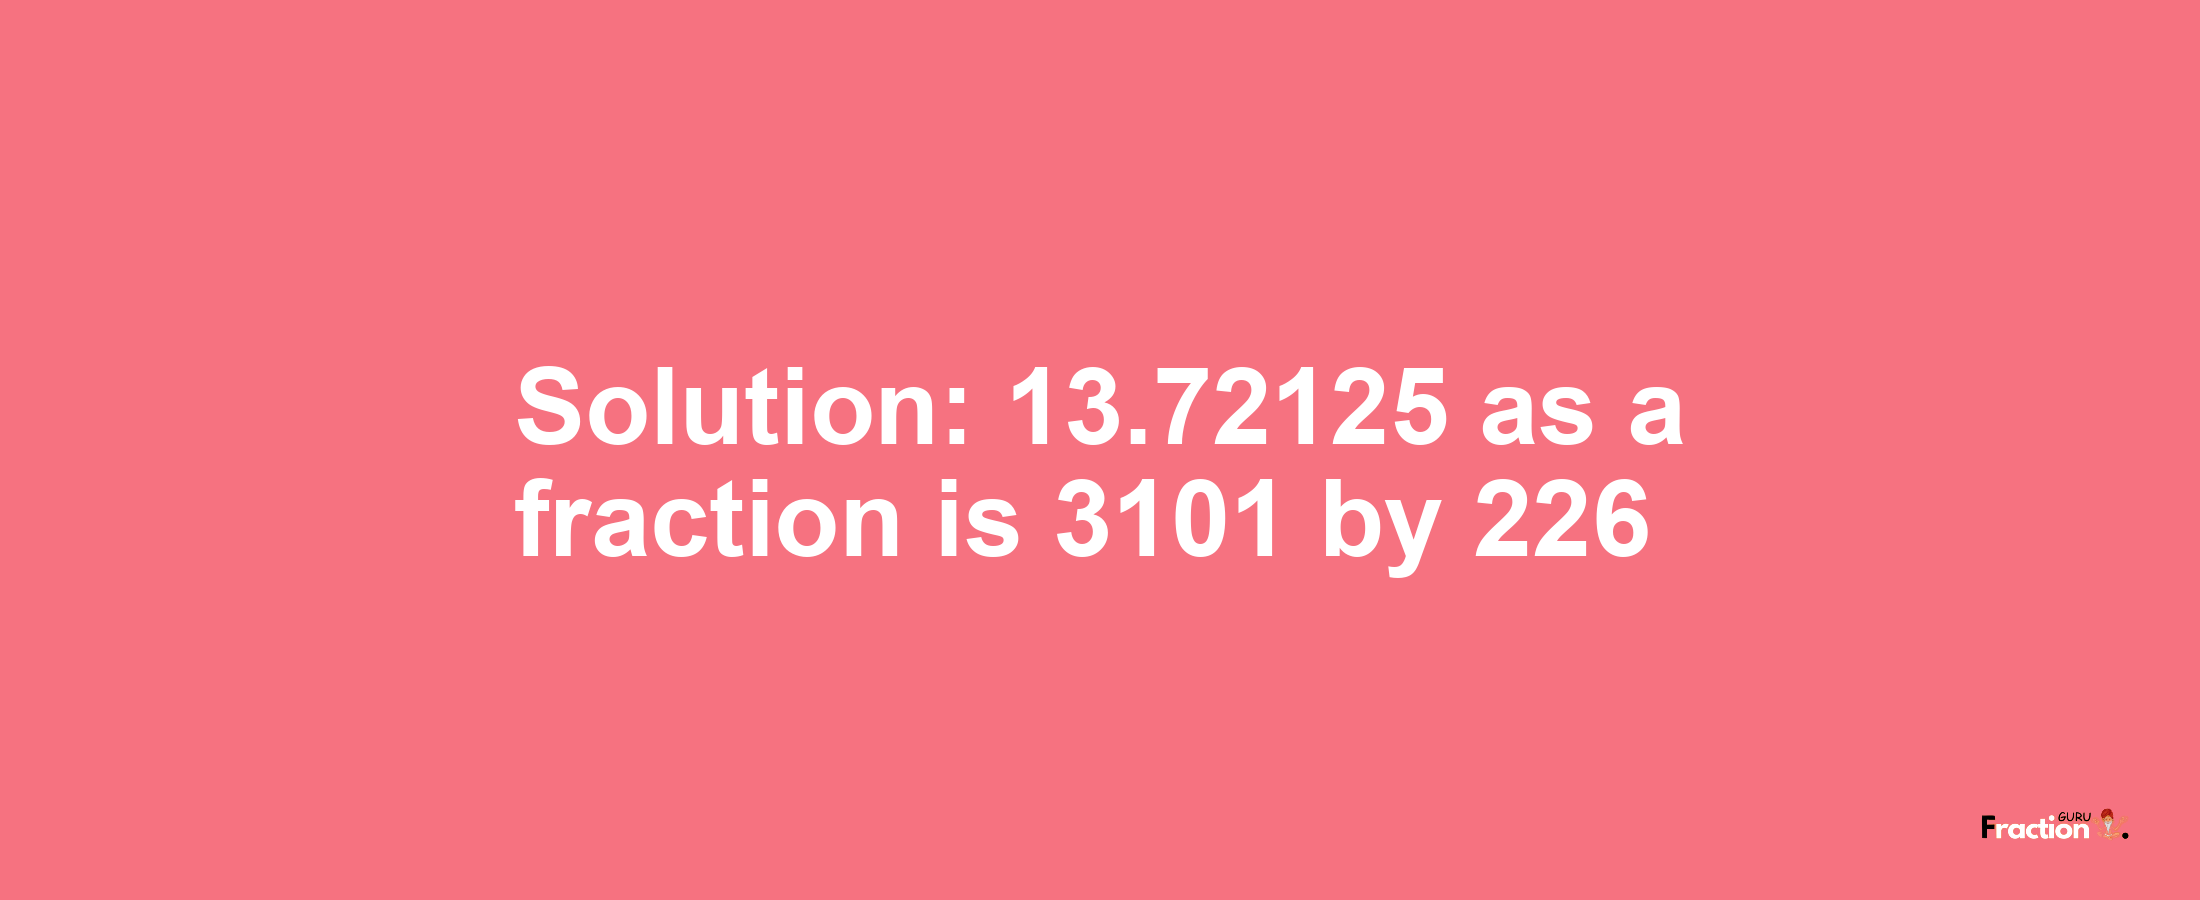 Solution:13.72125 as a fraction is 3101/226